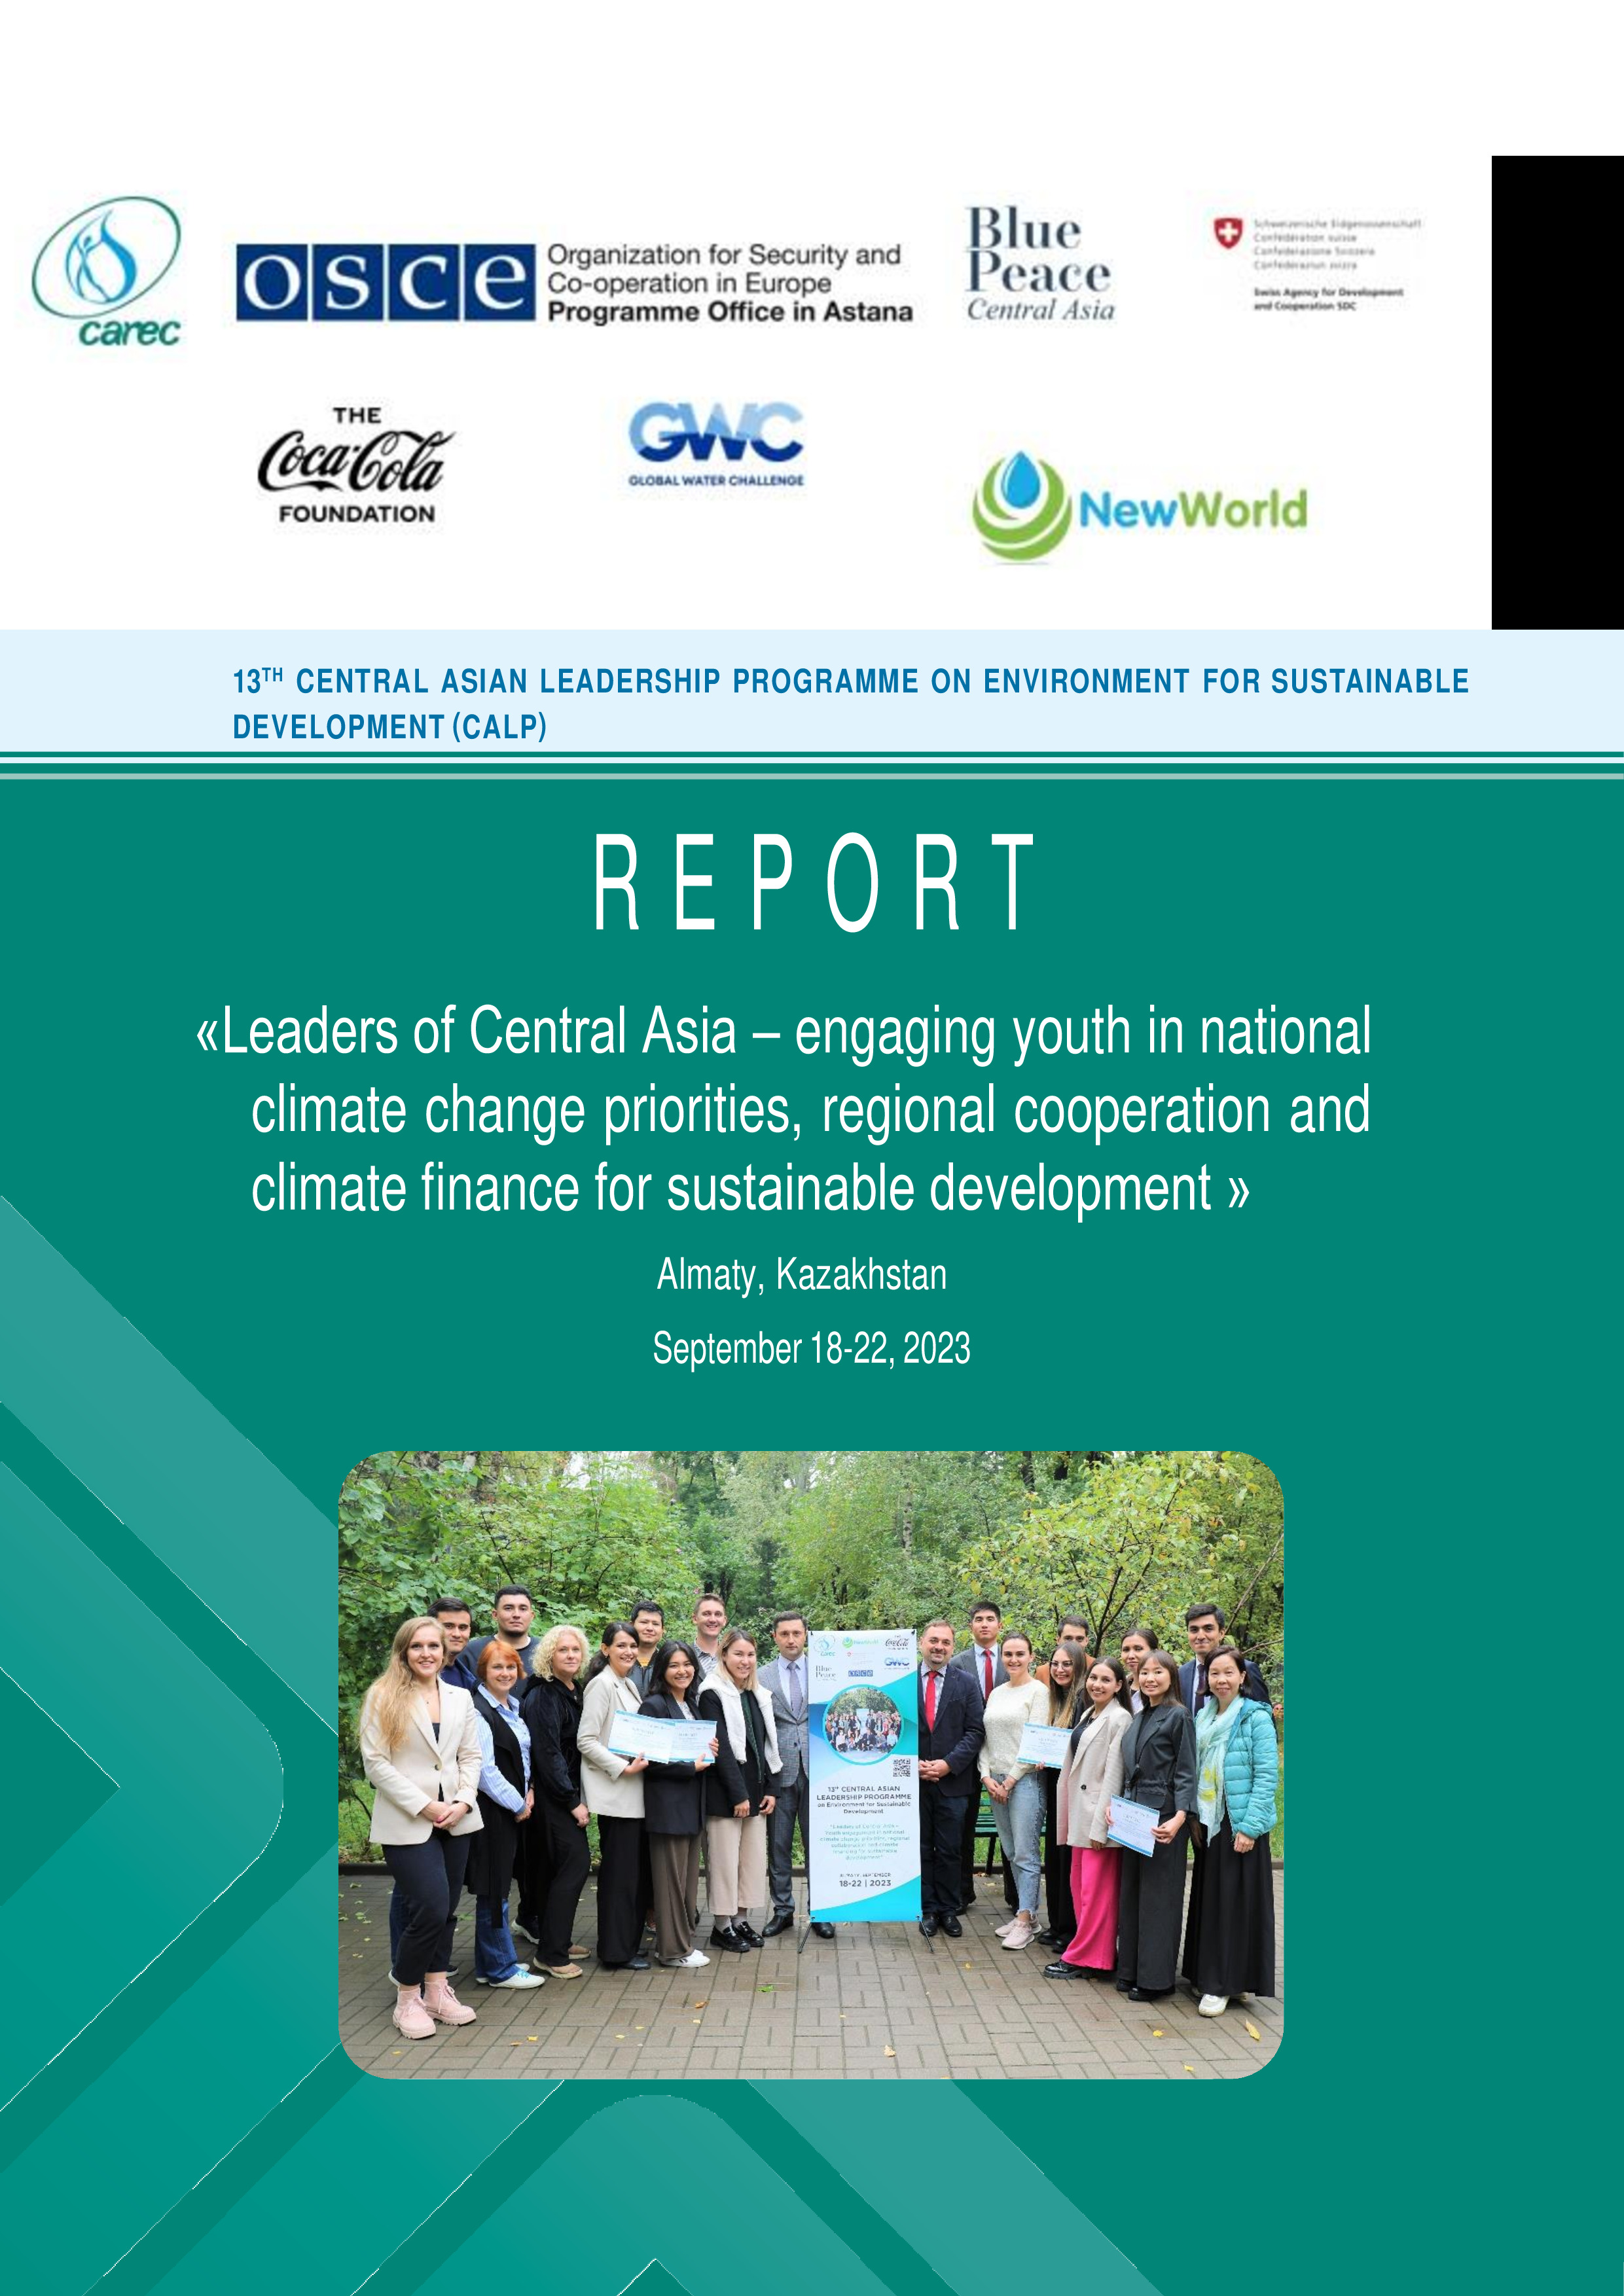 Report on the 13th Central Asian Leadership Programme on Environment for Sustainable Development (CALP), 2023